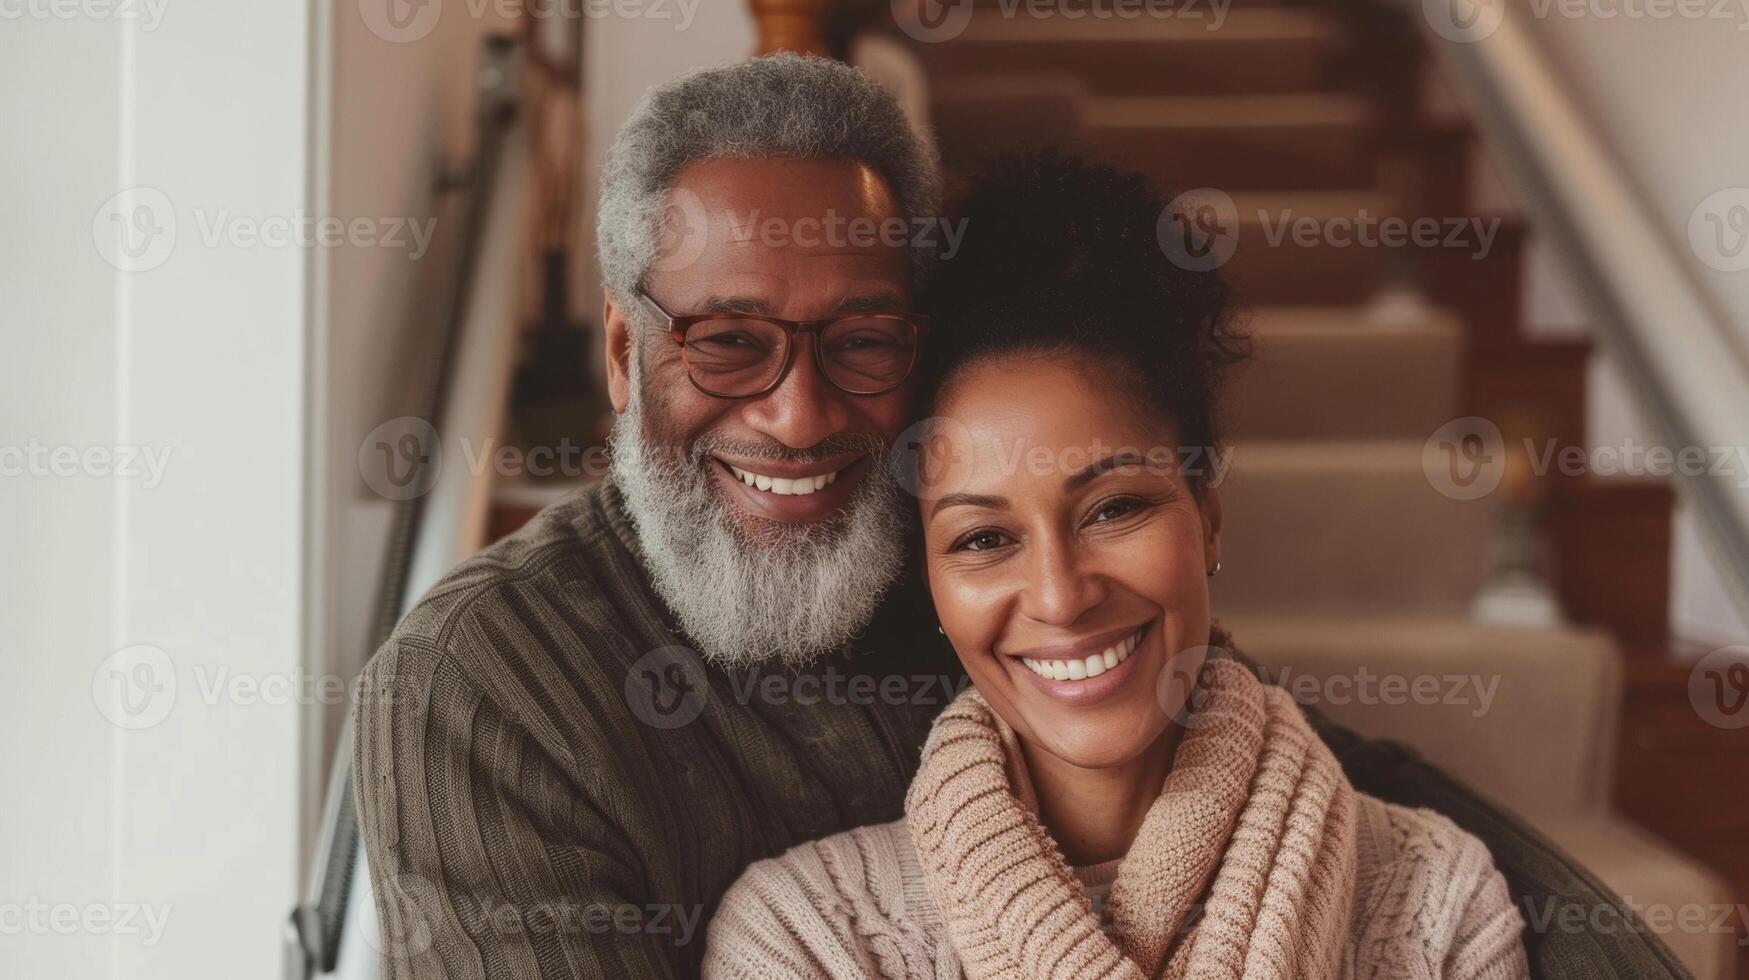 A happy couple embracing at the top of the stairs with a stair lift in the background symbolizing their continued ability to enjoy their home in retirement photo